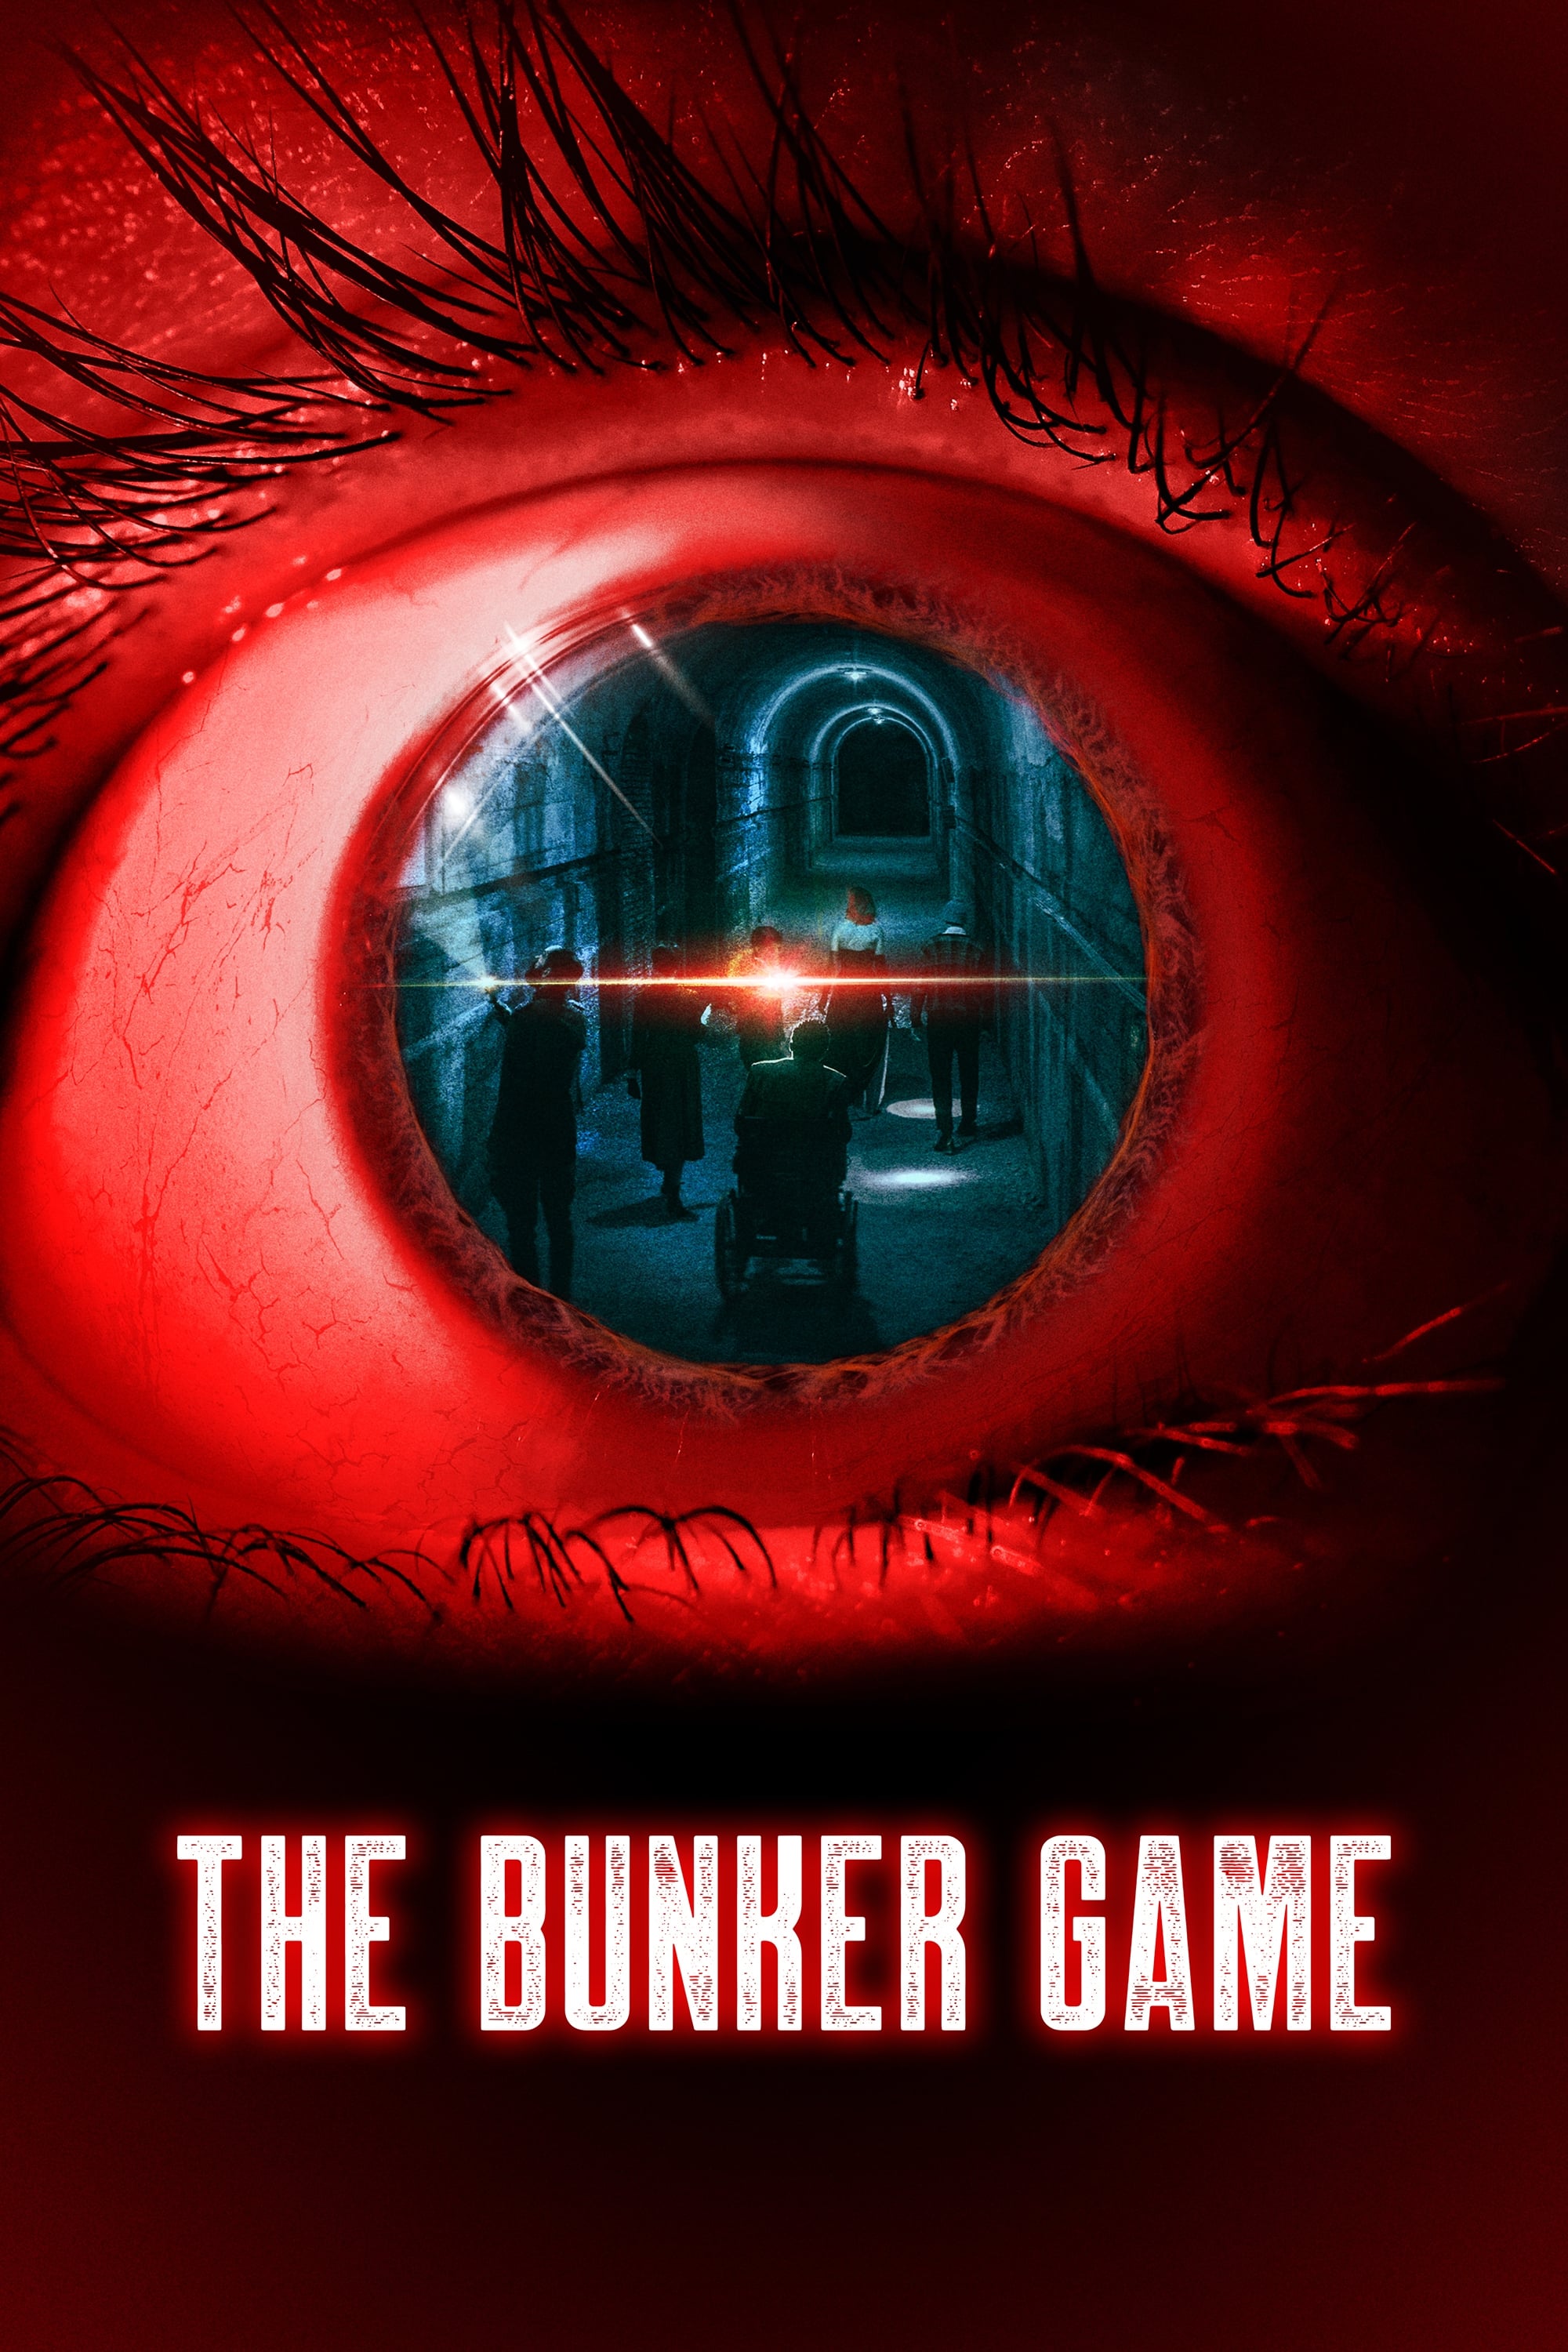 The Bunker Game film